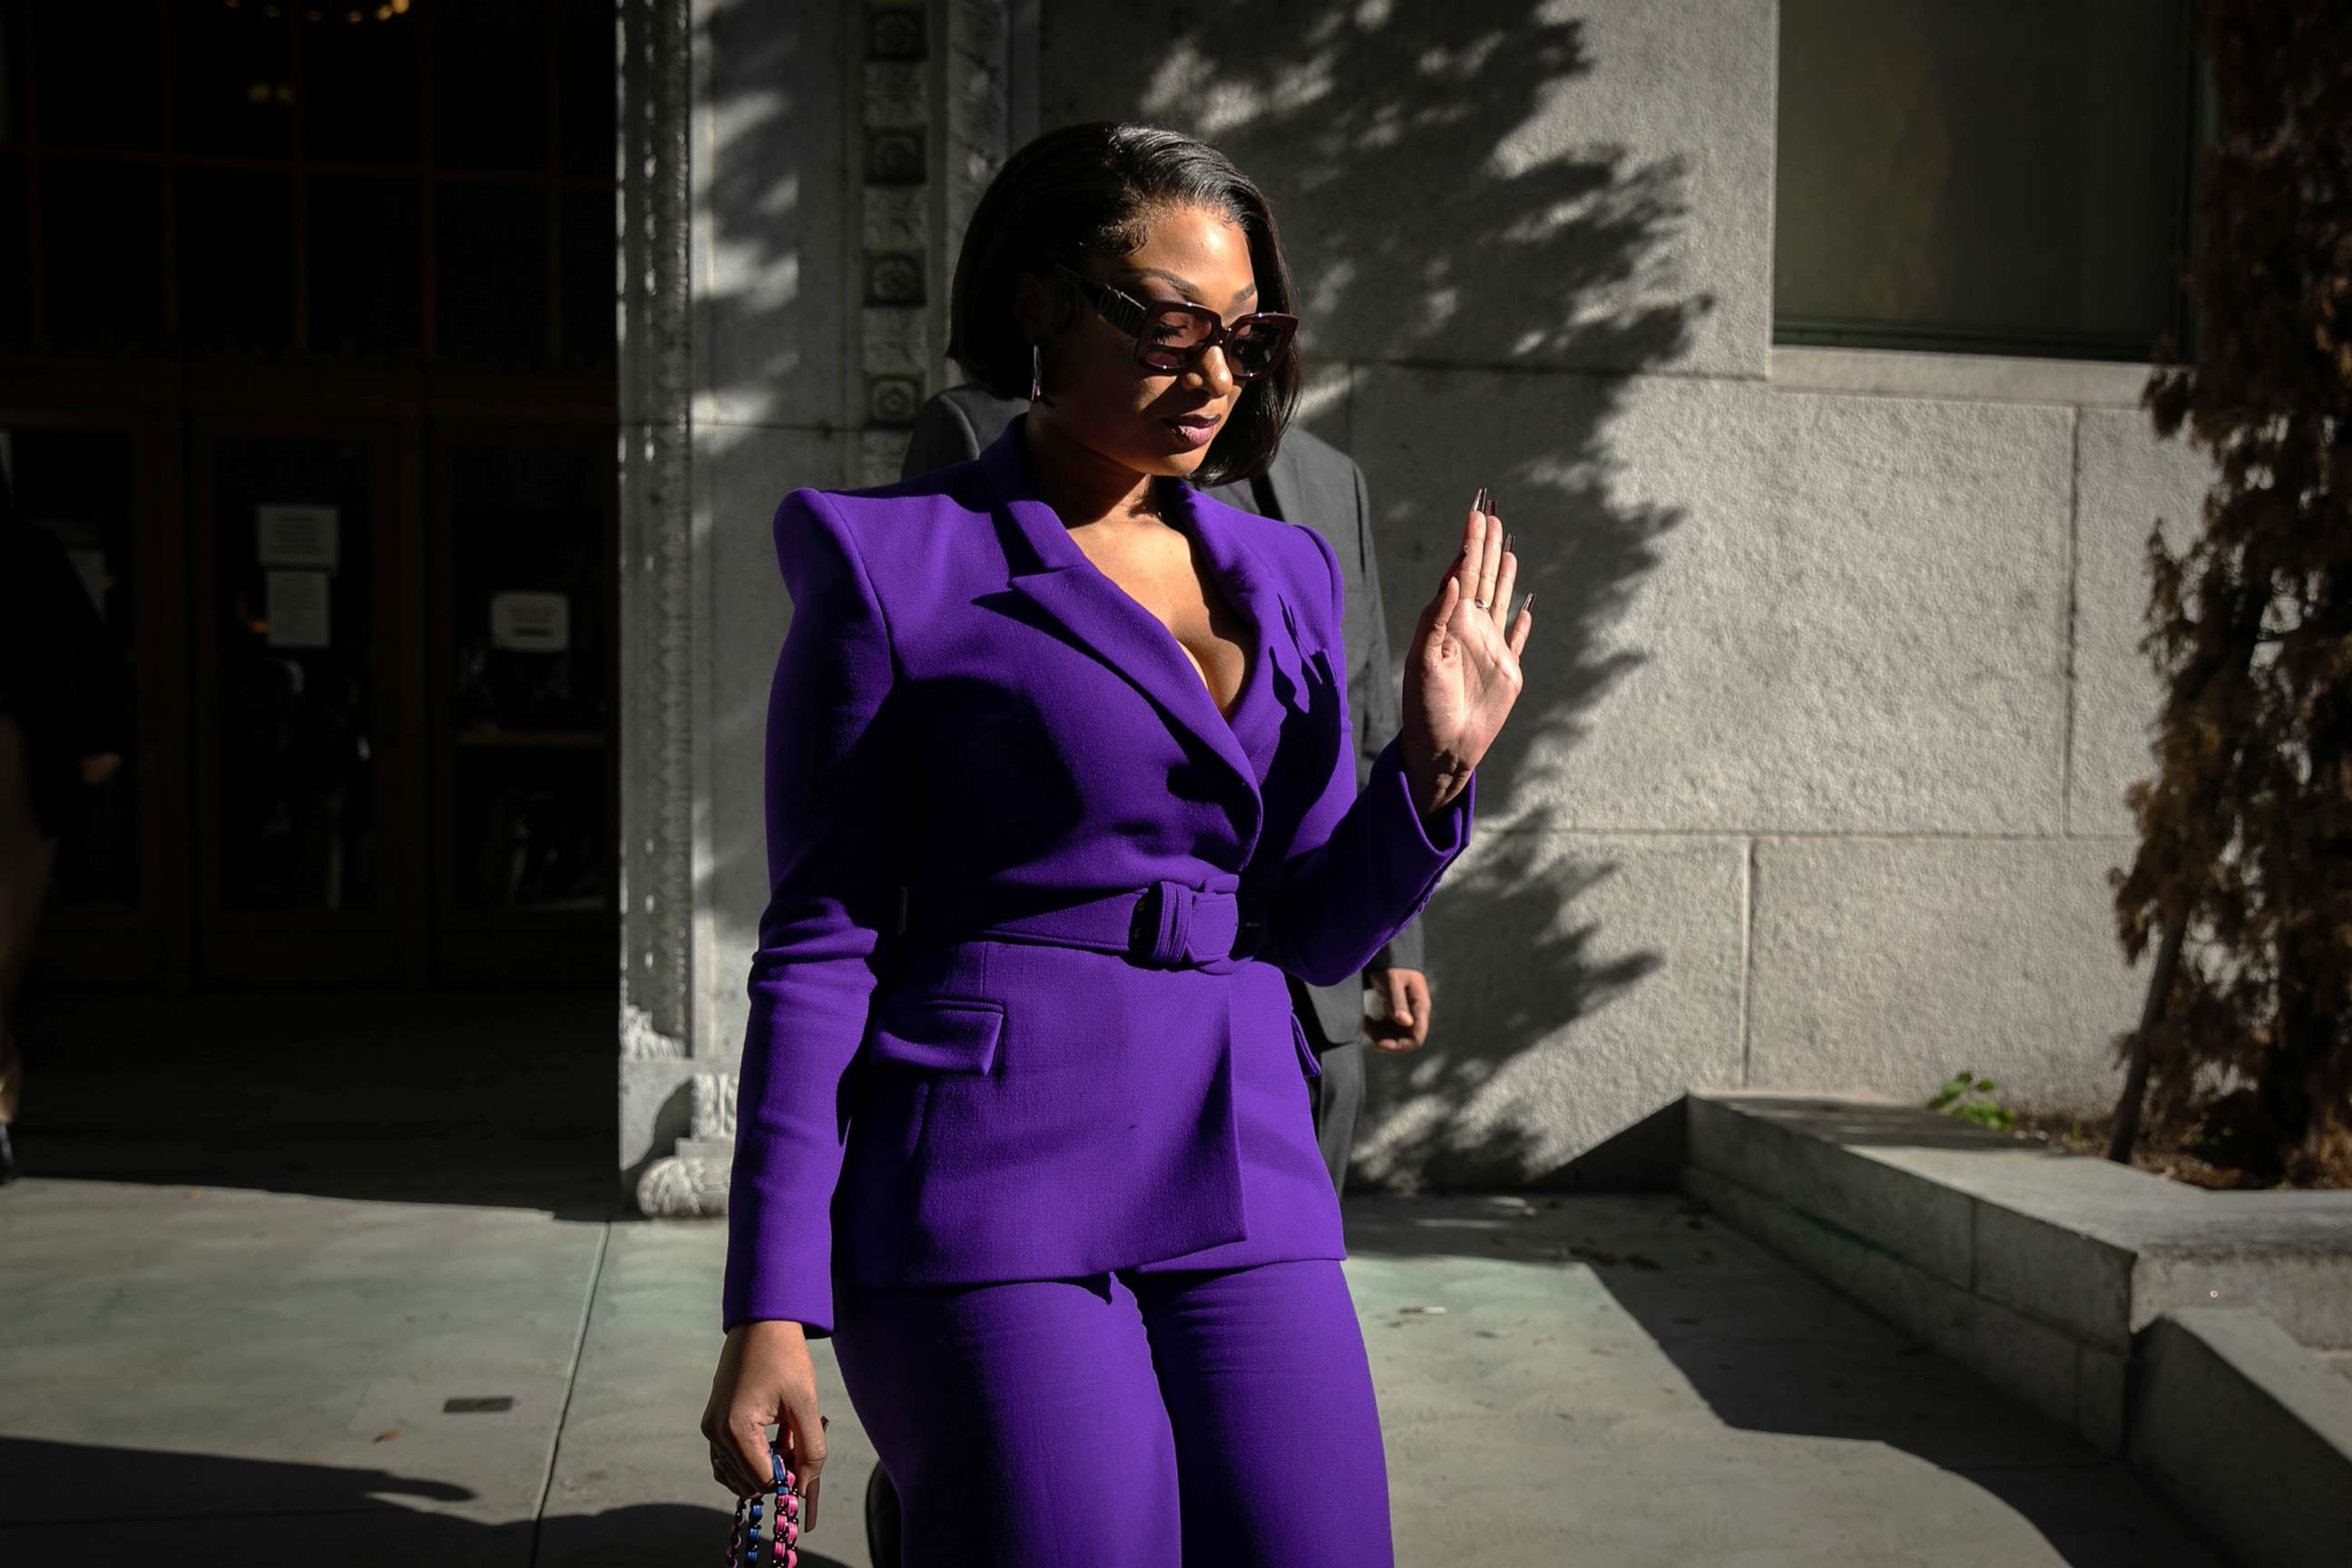 PHOTO: In this Dec. 13, 2022, file photo, Megan Thee Stallion, whose legal name is Megan Pete, makes her way from the Hall of Justice to the courthouse to testify in the trial of Rapper Tory Lanez for allegedly shooting her, in Los Angeles, CA.